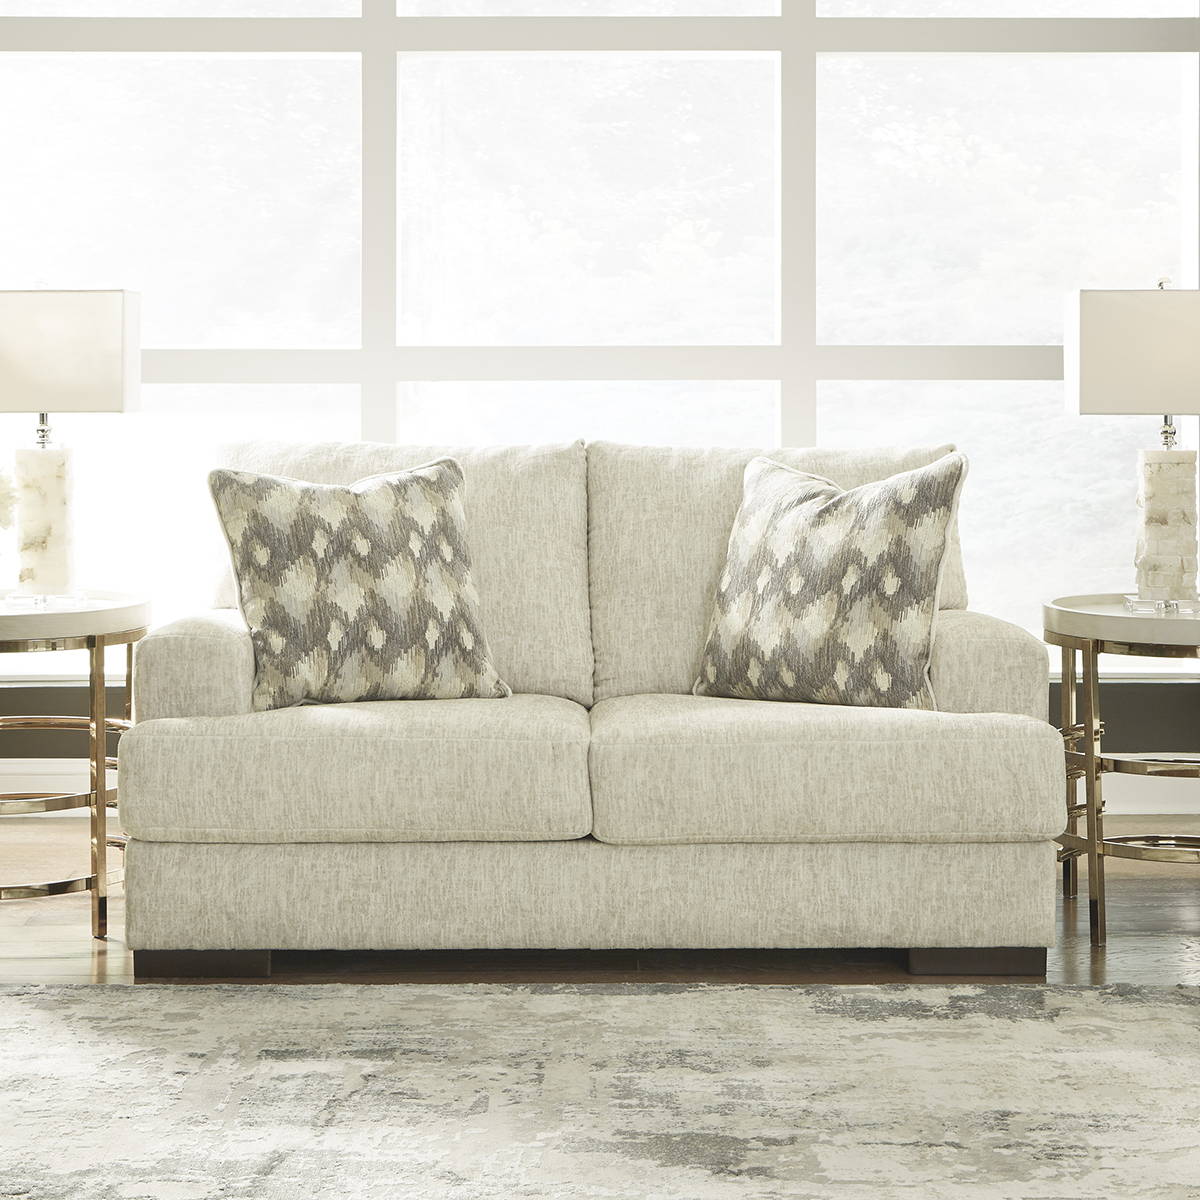 Ashley Off-White Loveseat with Matching Pillows in a Living Room. Shop Loveseats Now!